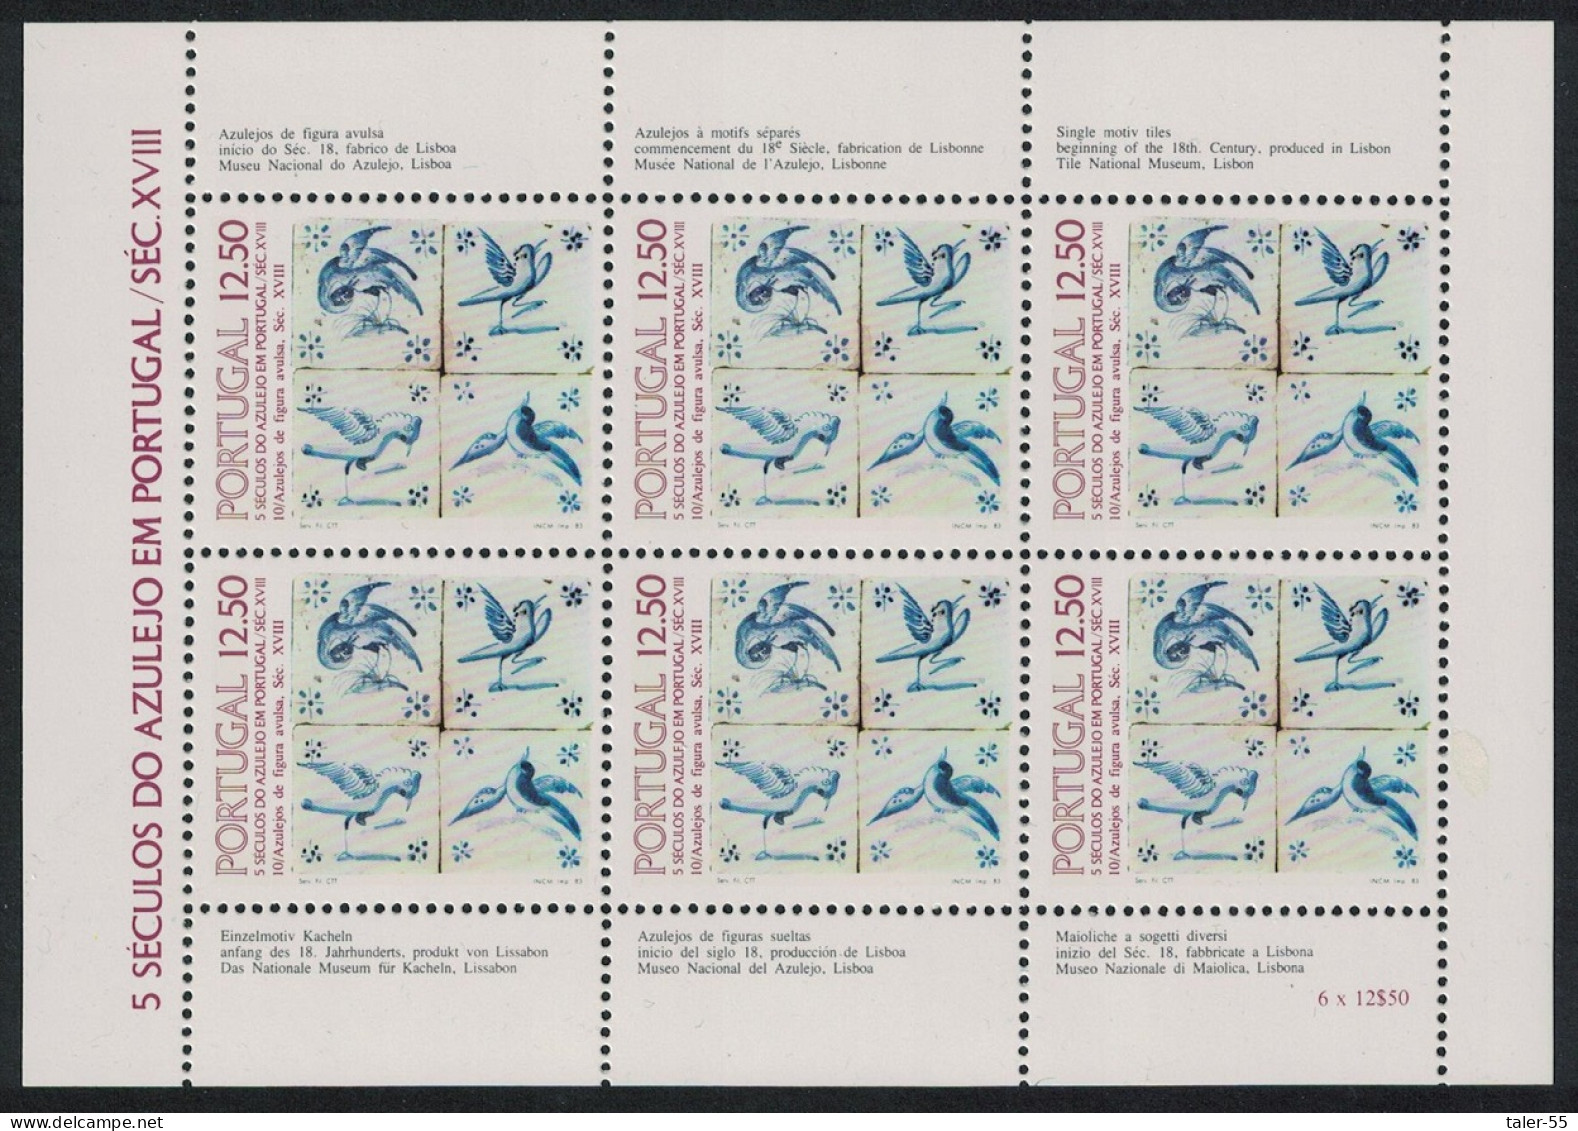 Portugal Birds Tiles 10th Series MS 1983 MNH SG#MS1927 - Unused Stamps